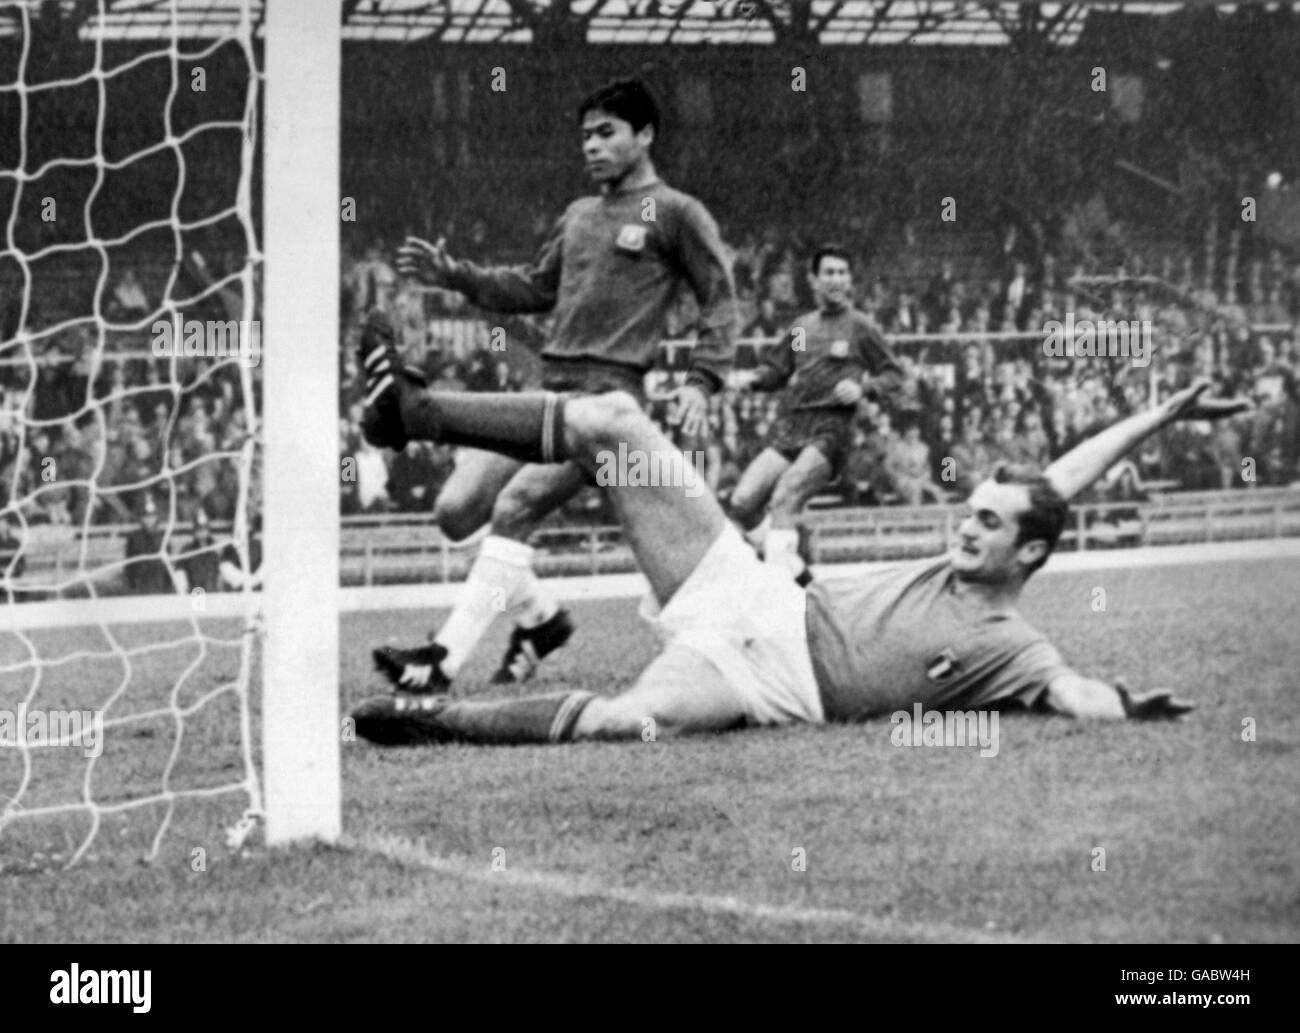 Italy's Sandro Mazzola slides in to score the opening goal in Italy's 2-0 win Stock Photo